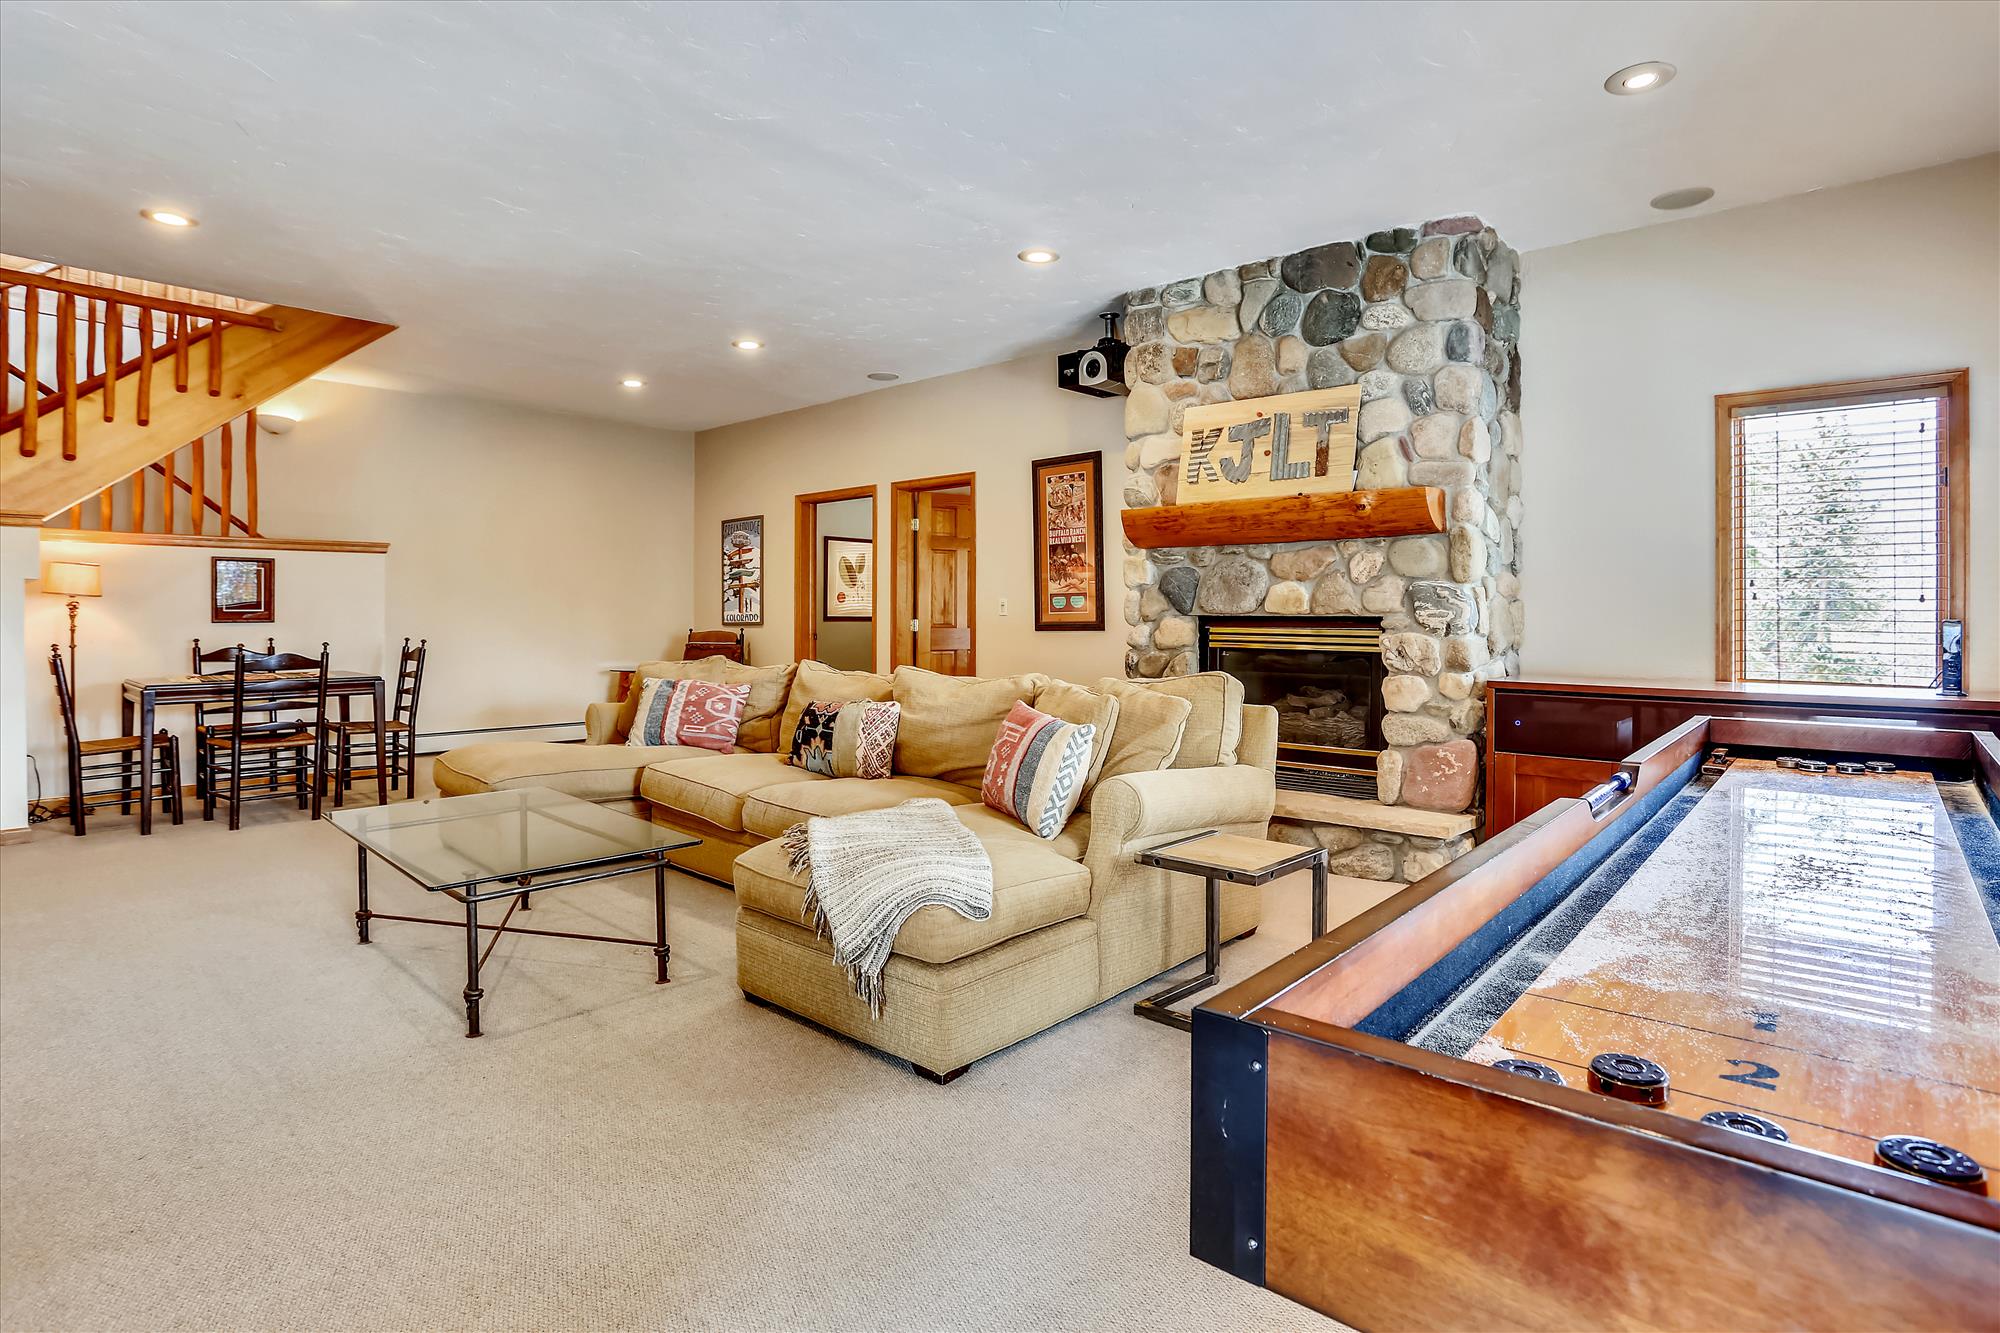 Additional view of lower level family room with game table - 10 Southface Breckenridge Vacation Rental